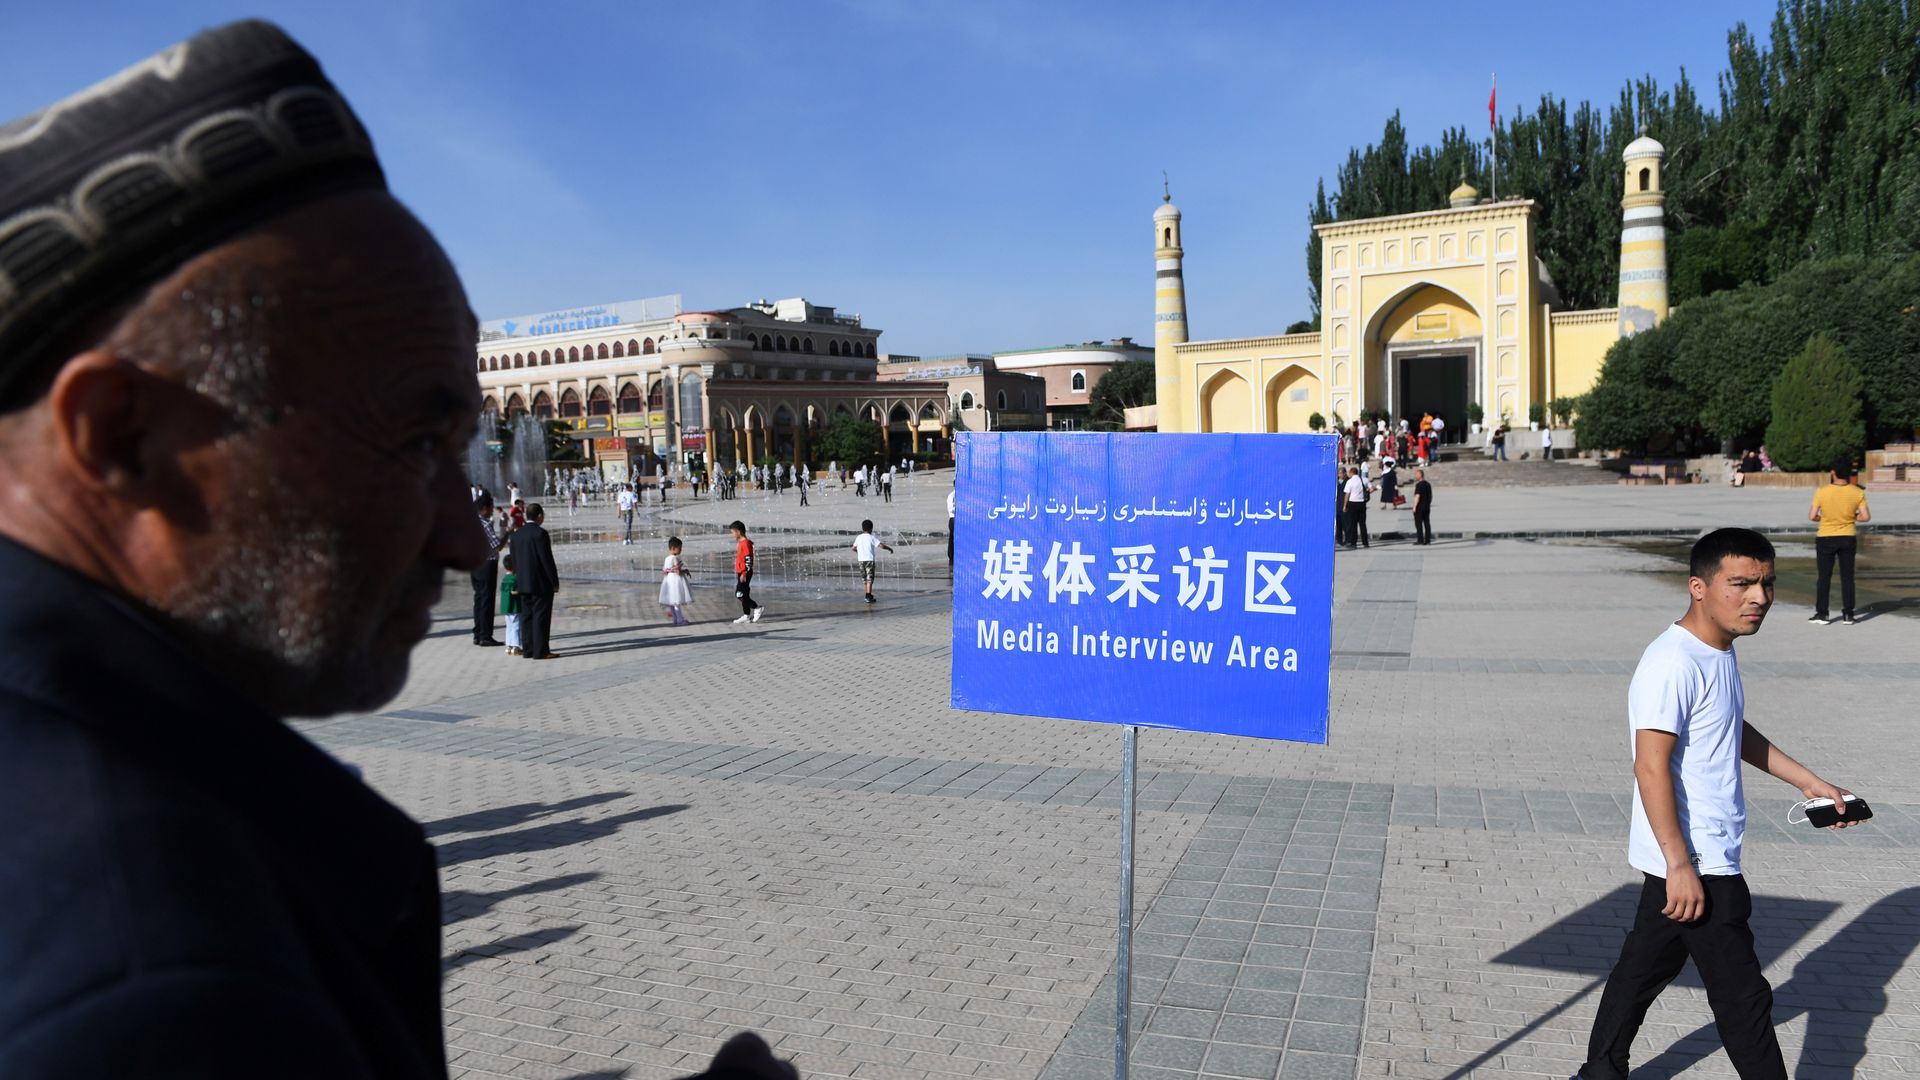 A Muslim man is seen near a designated media interview are in the Xinjiang region of China.